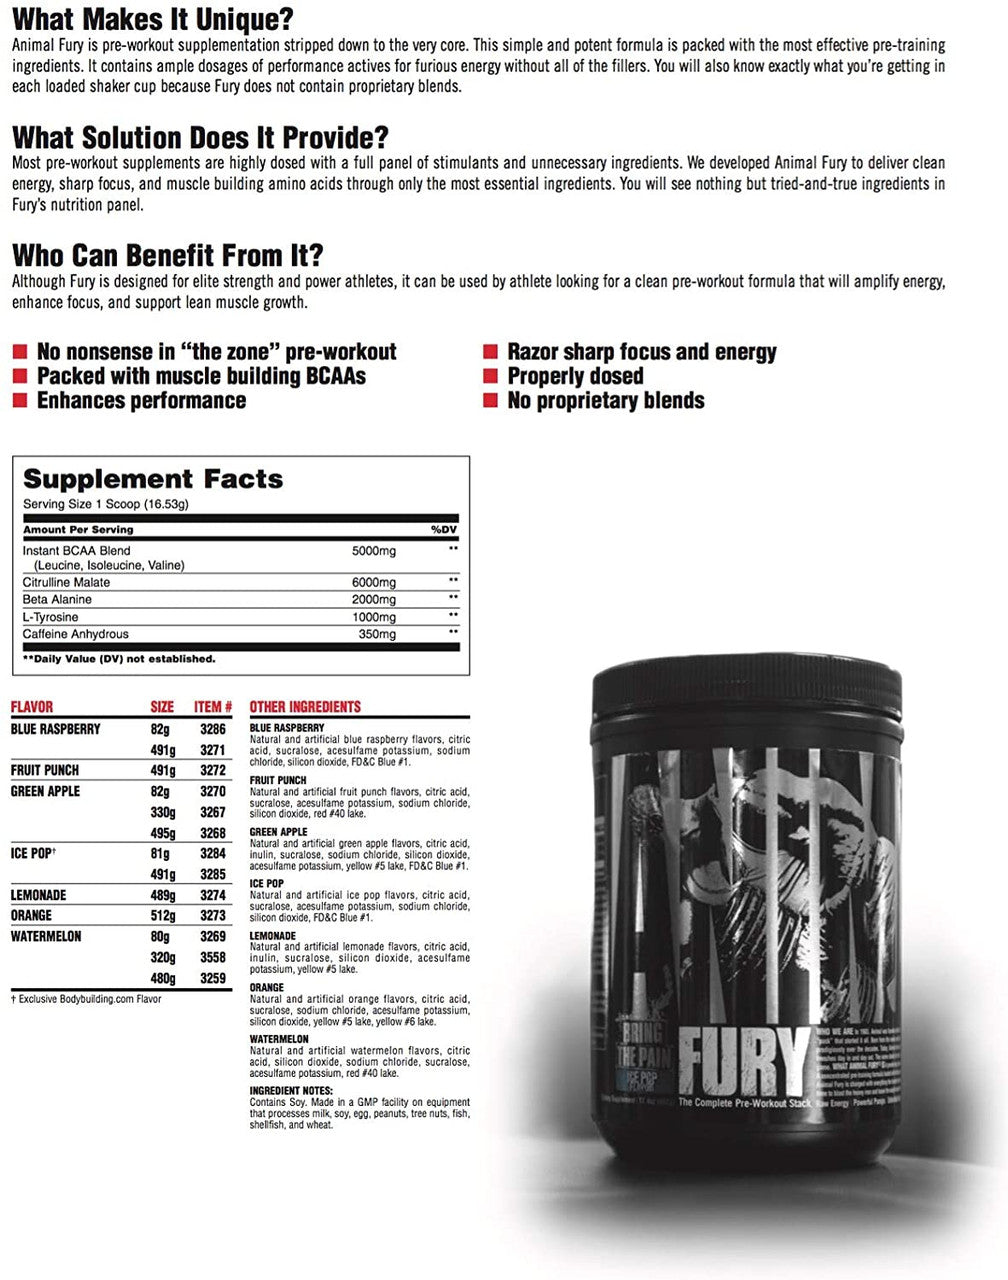 Animal Fury Supplement Facts 2